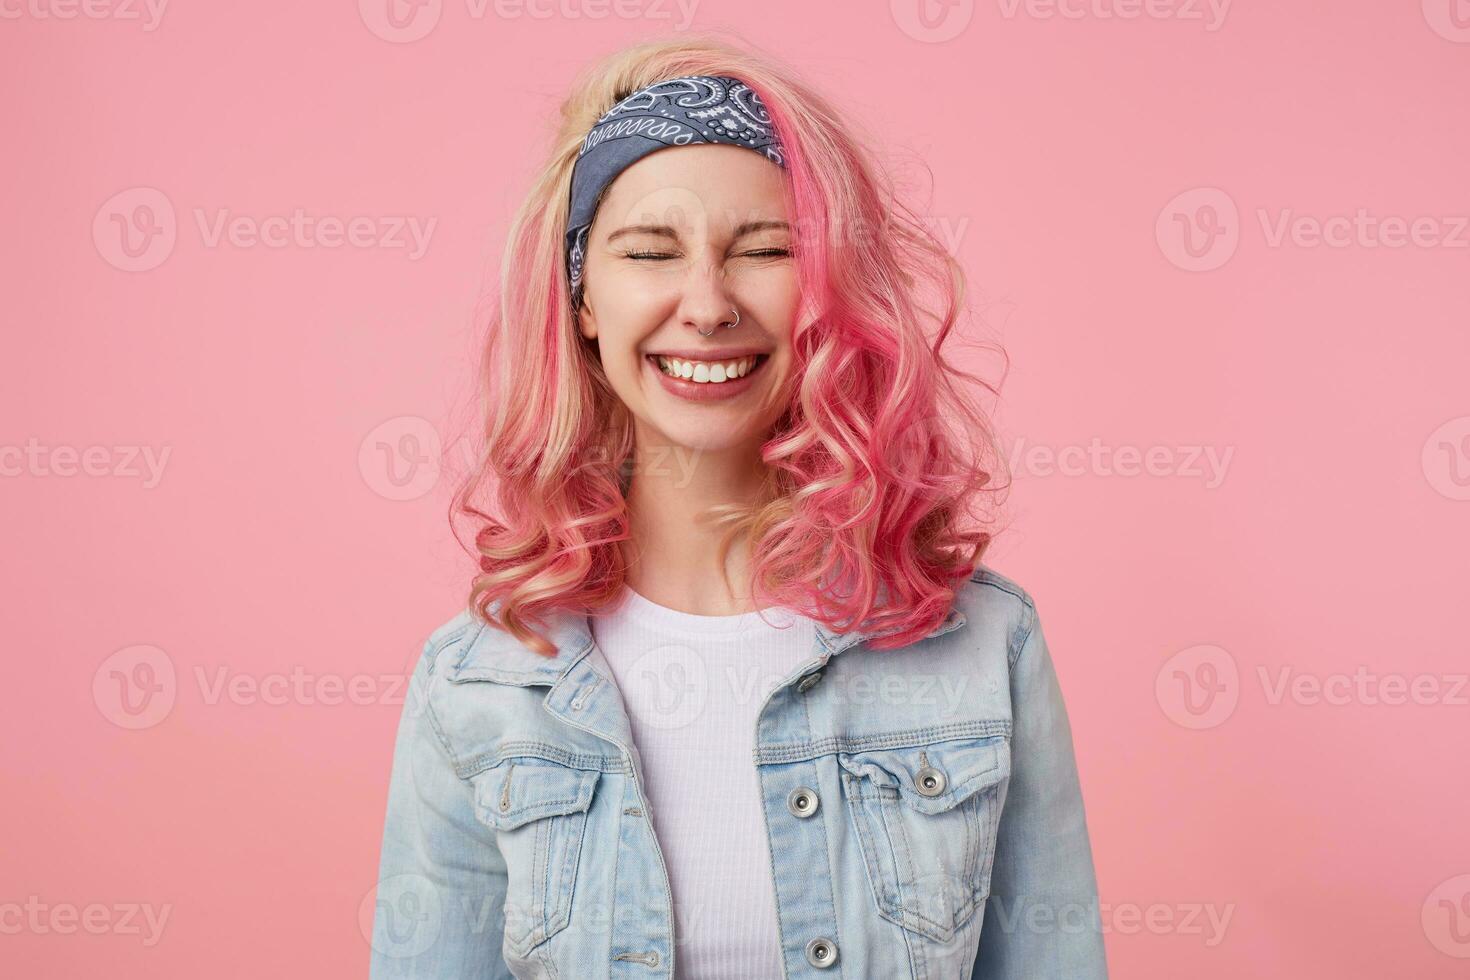 Happy cute smiling lady with pink hair and tattooed hands, waiting for surprise with closed eyes, broadly smiling, standing over pink background, wearing a white t-shirt and denim jacket. photo